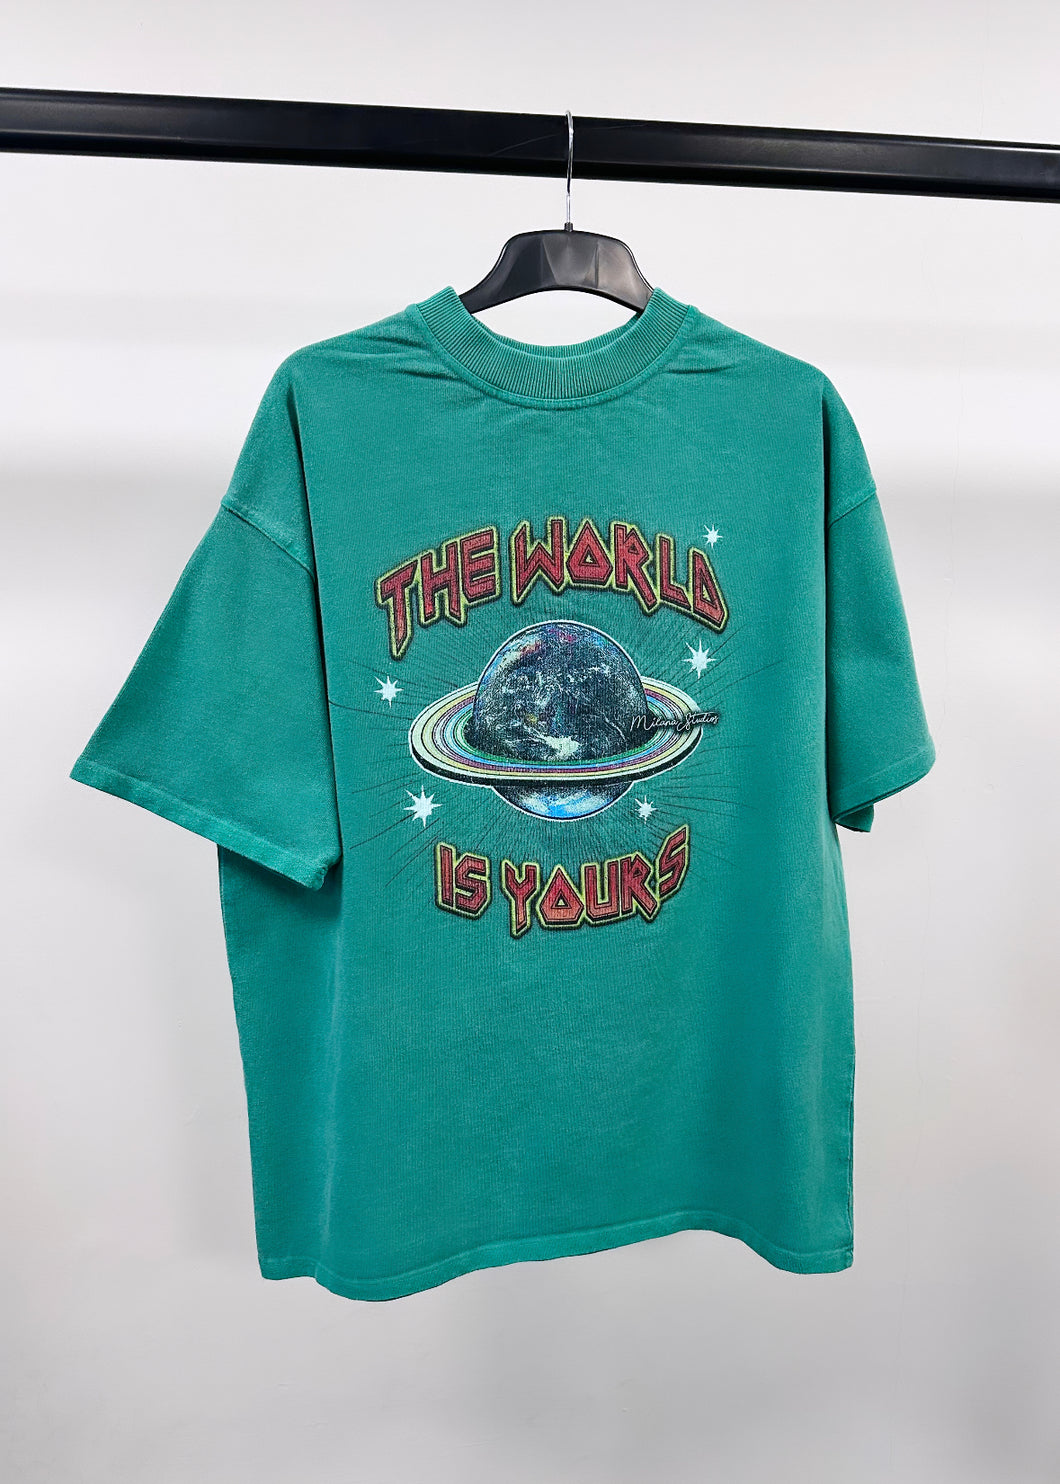 Washed Teal Planet Heavyweight T-shirt.